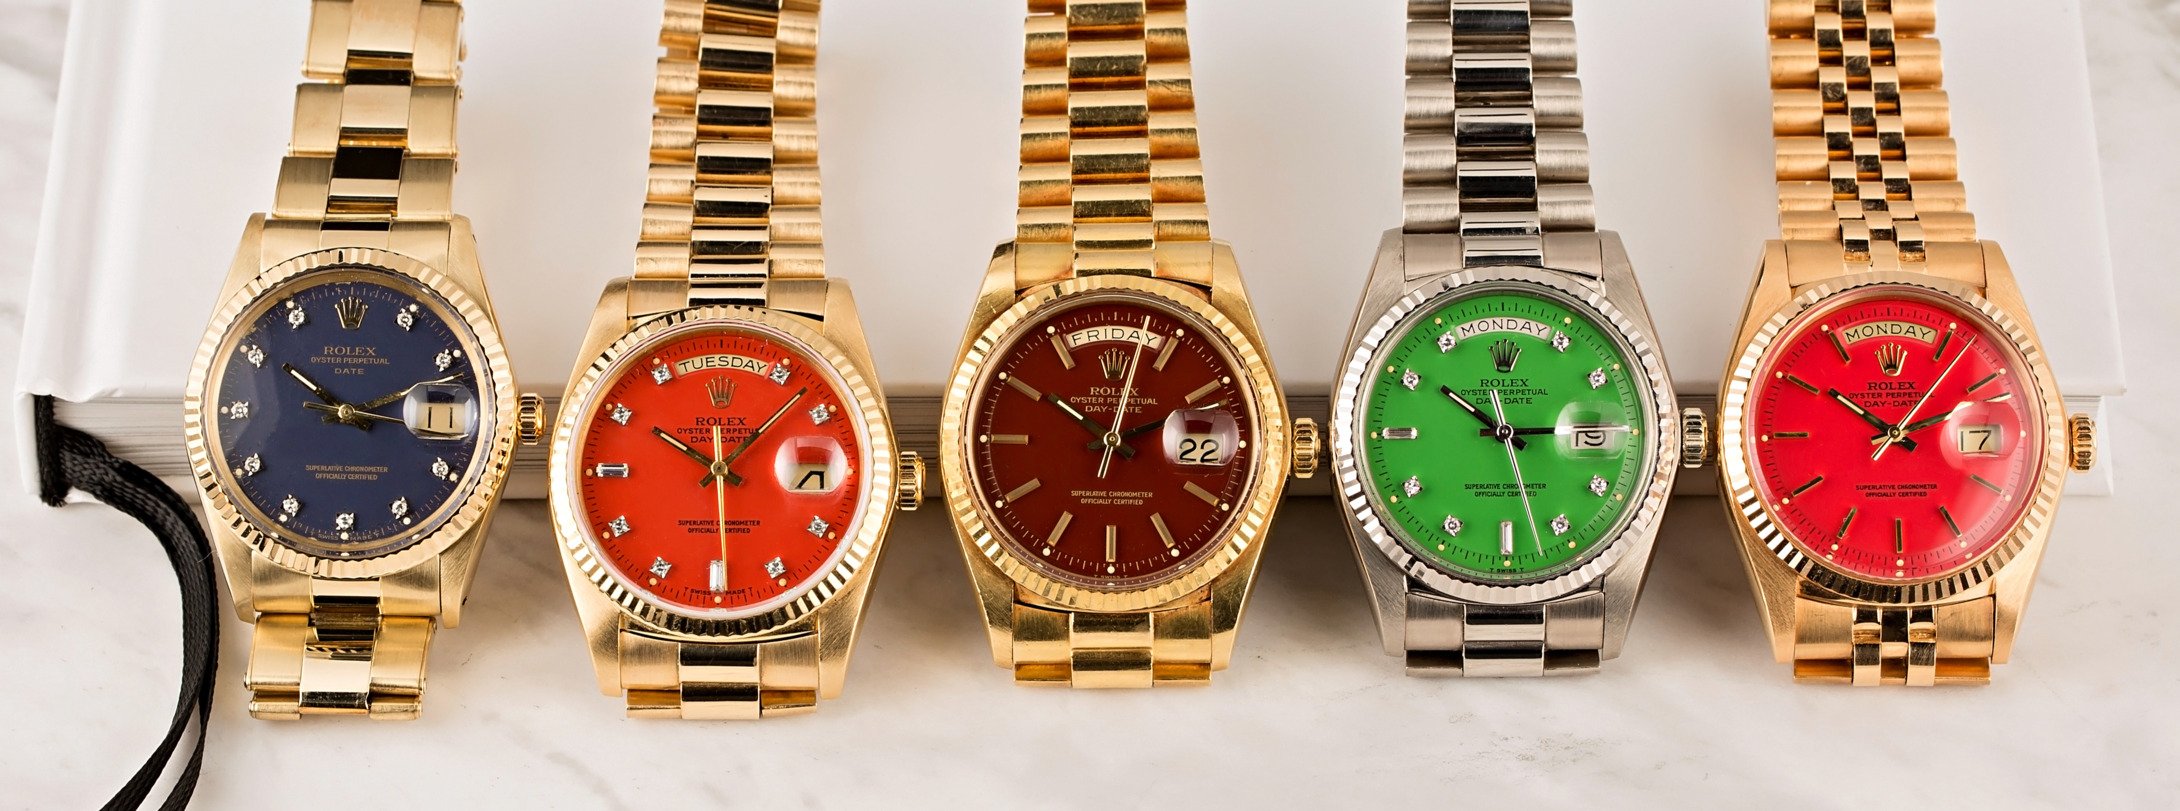 Best Women’s Watches for Investing: Rolex Stella Dials – Exclusive Retail Partnership with Goop